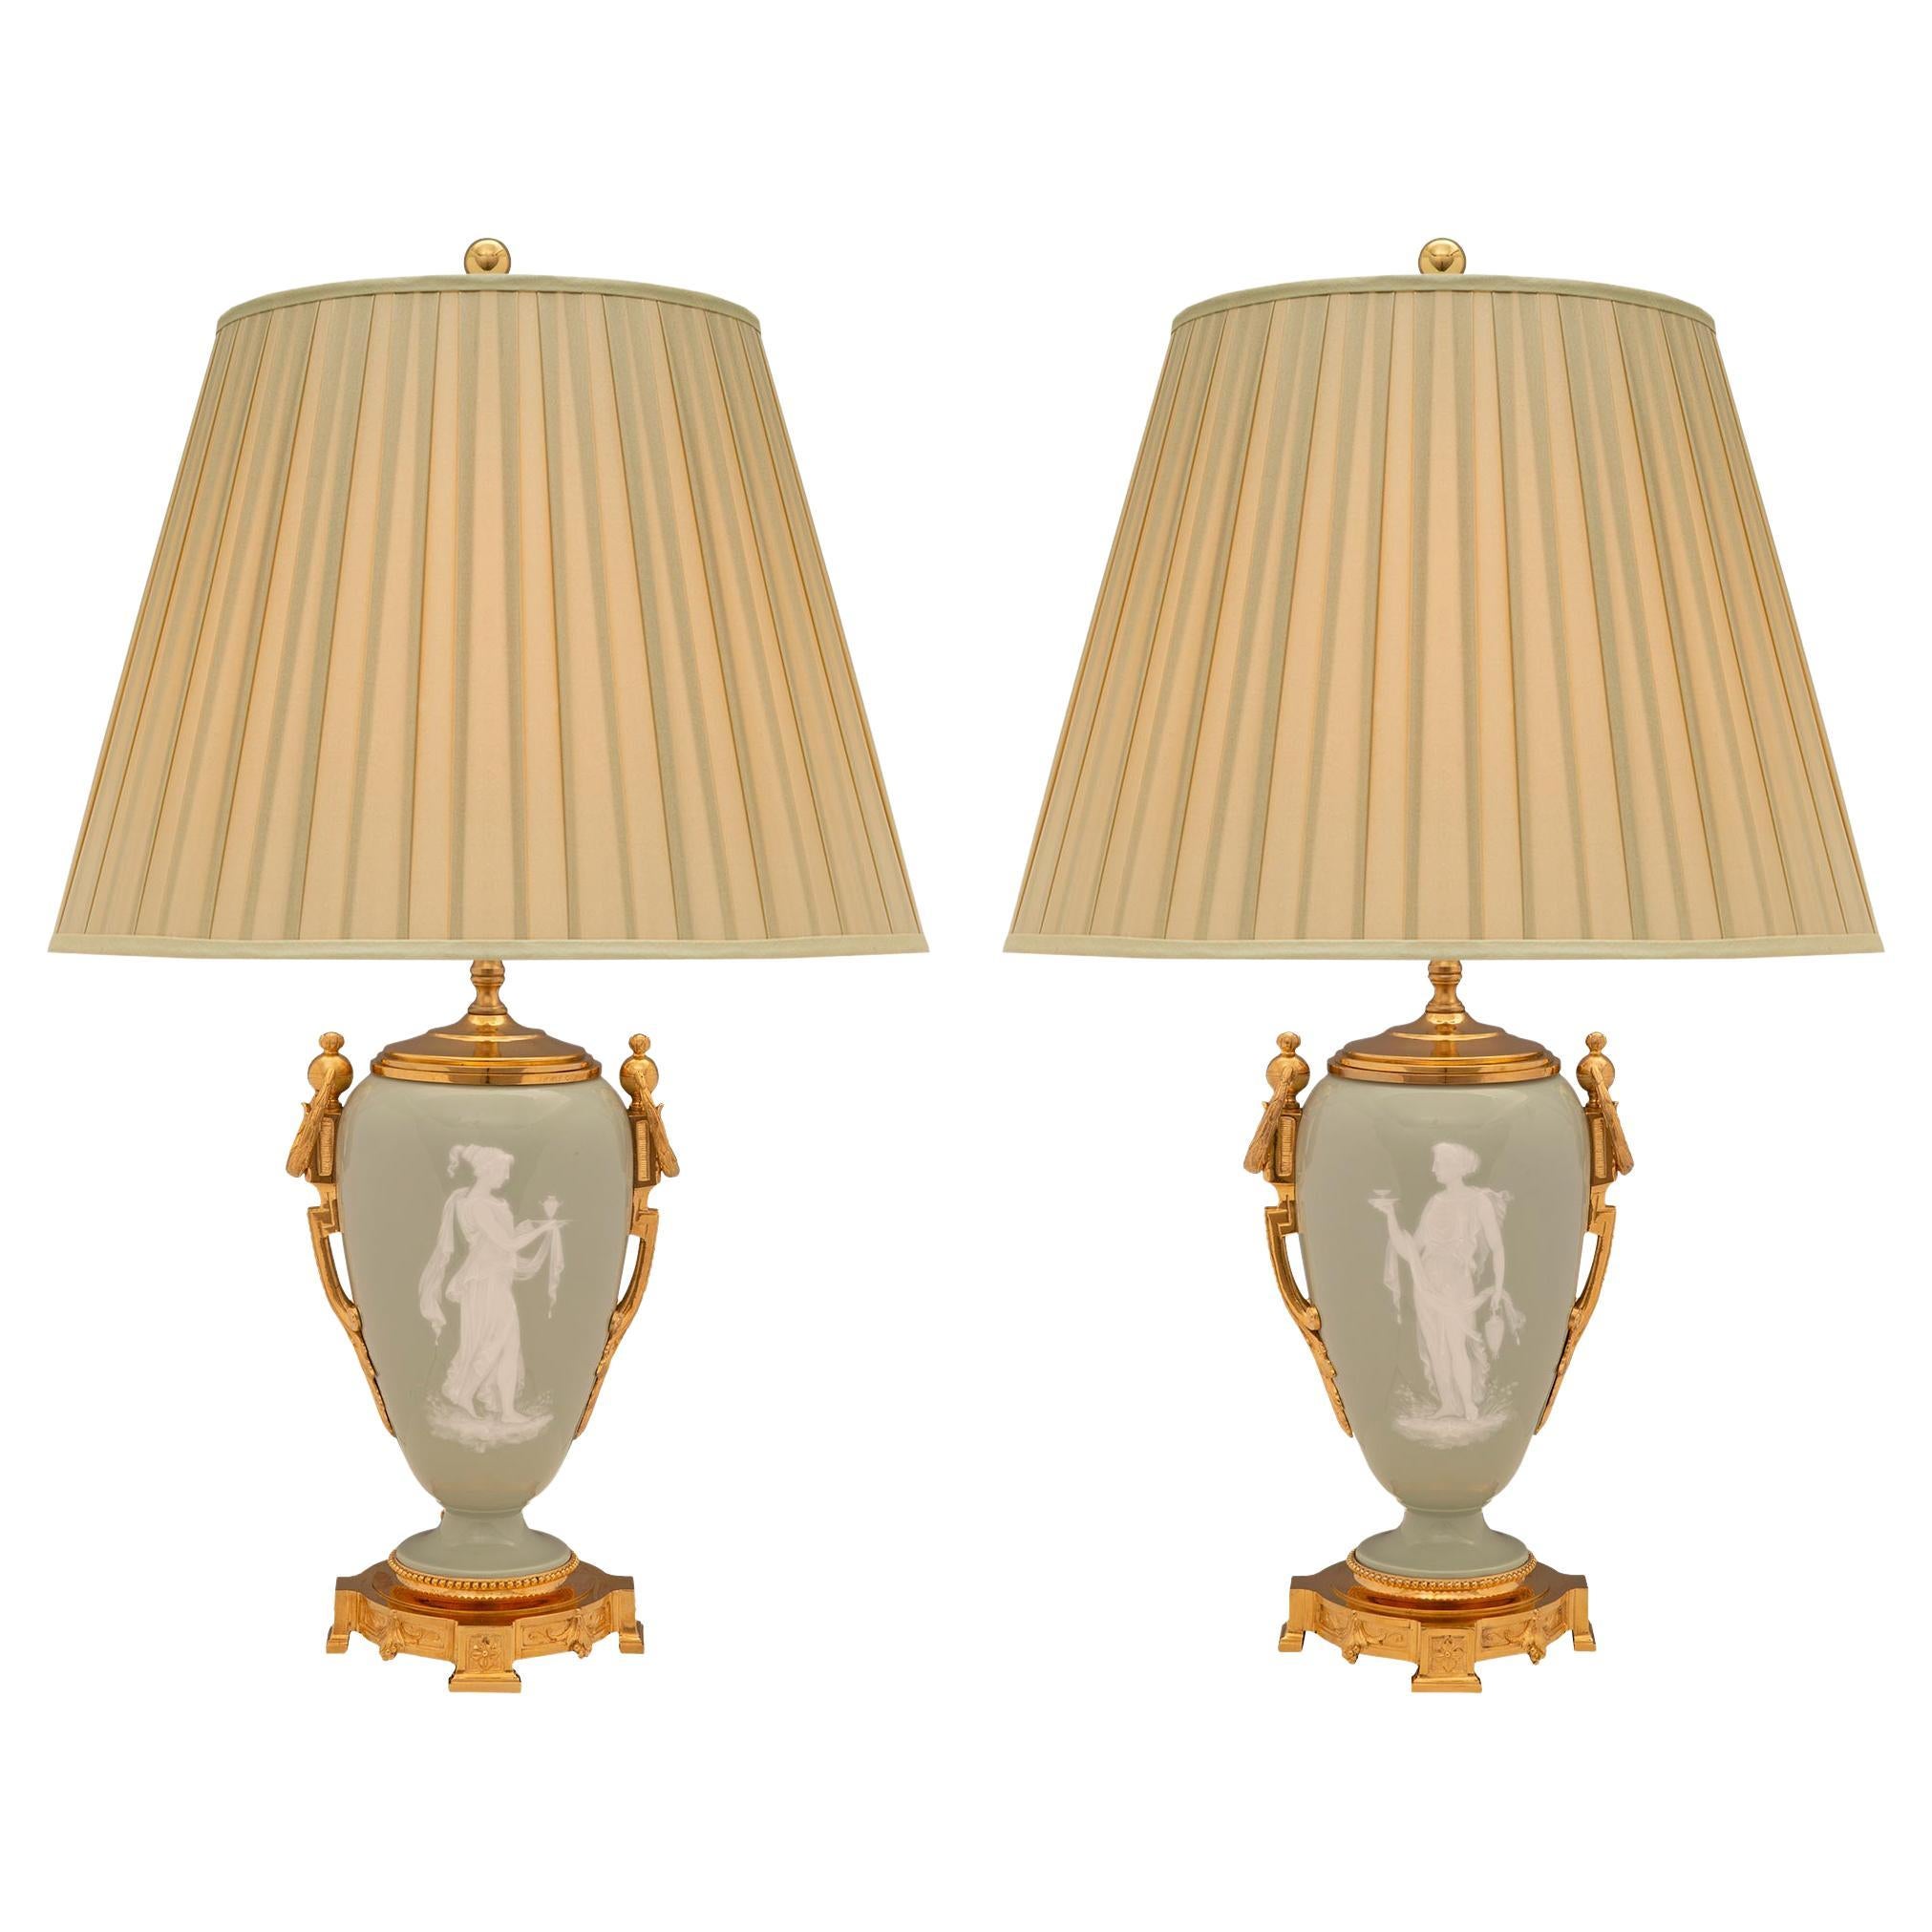 Pair of French 19th Century Louis XVI St. Ormolu and Celadon Porcelain Lamps